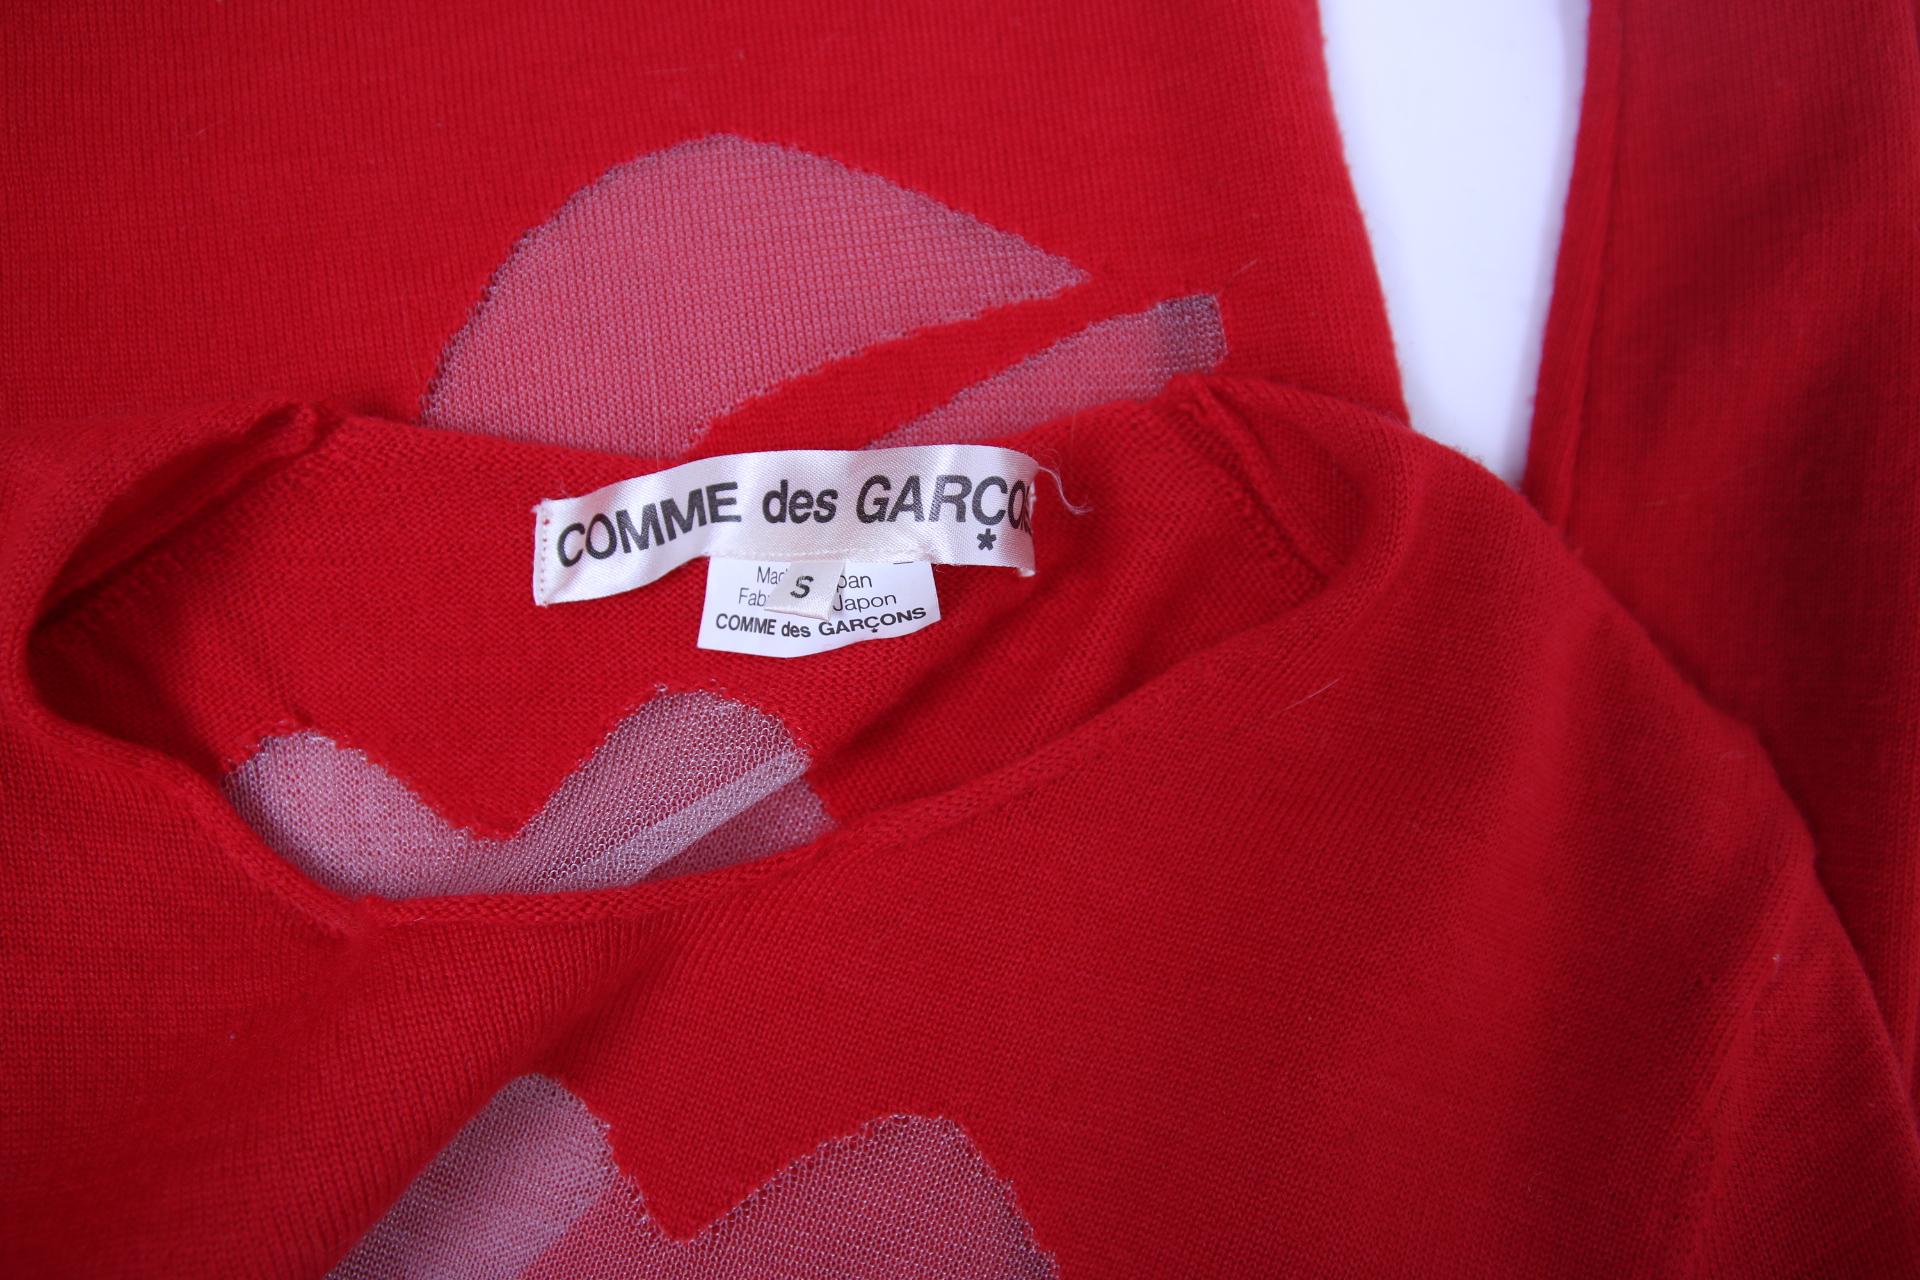 Comme des Garcons Red Wool Sweater Dress w/Transparent Lip Motif 2008 In Excellent Condition For Sale In Studio City, CA